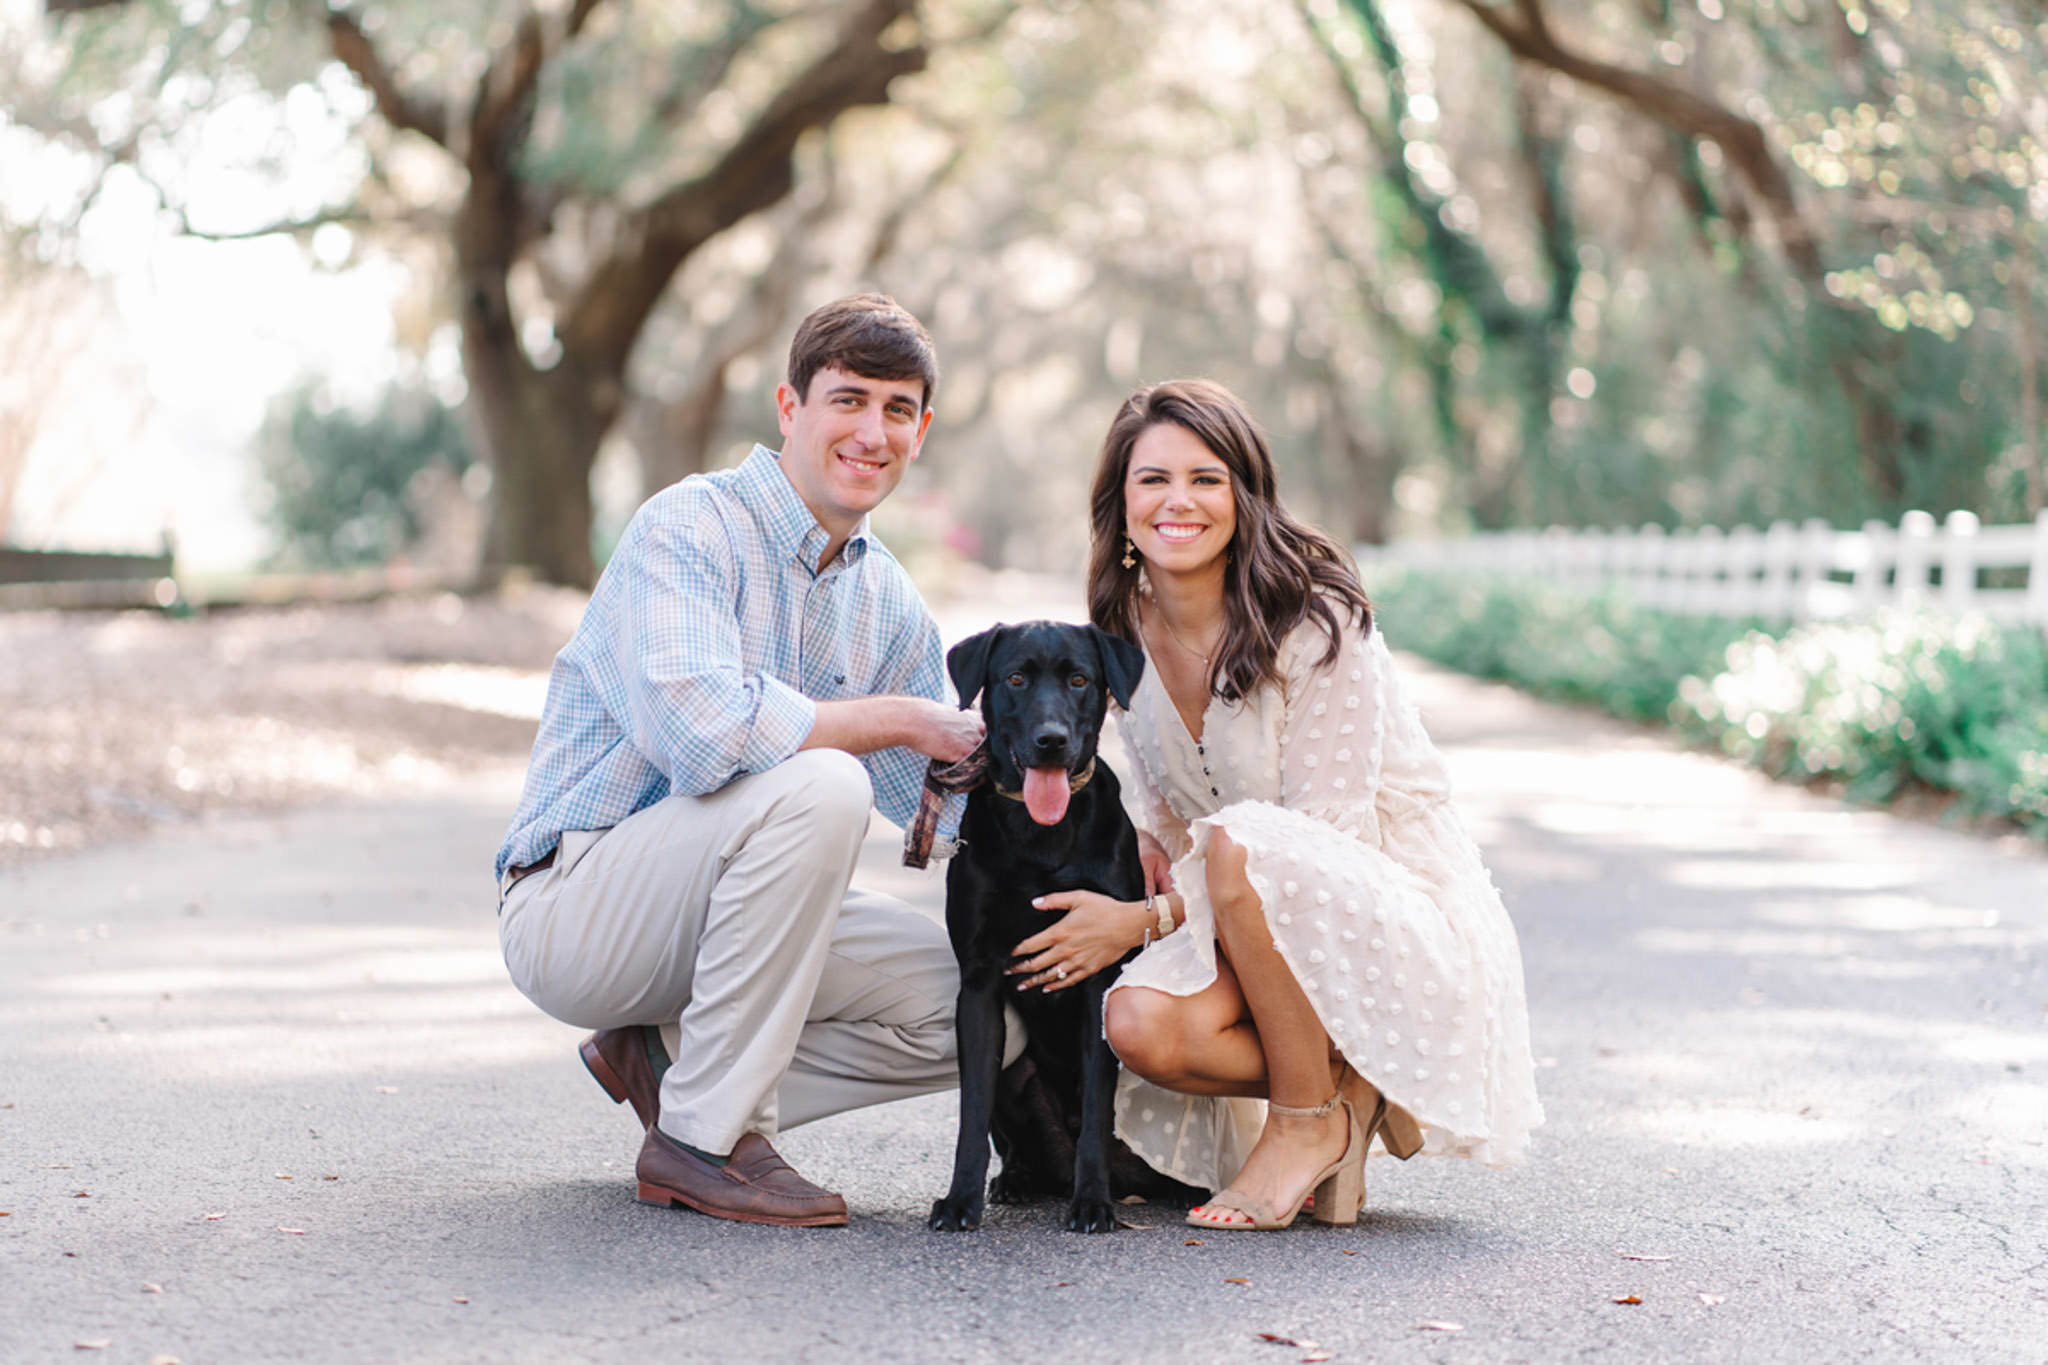 Spring Pawleys Island Engagement Session - Engagement Pictures in Pawleys Island 